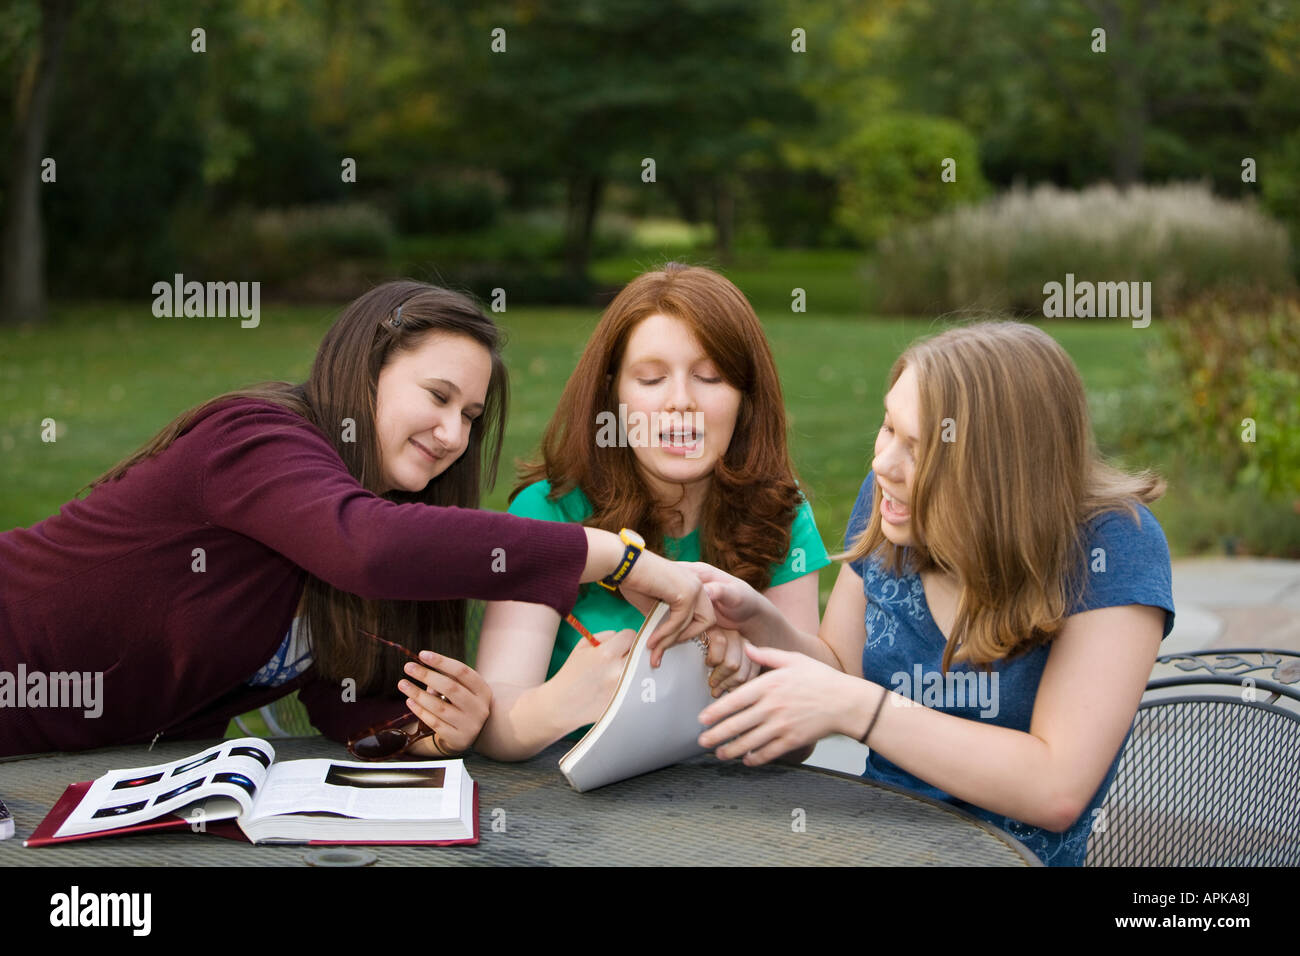 ILLINOIS Riverwoods Three teenage girls goofing around instead of studying together textbook open on table Stock Photo